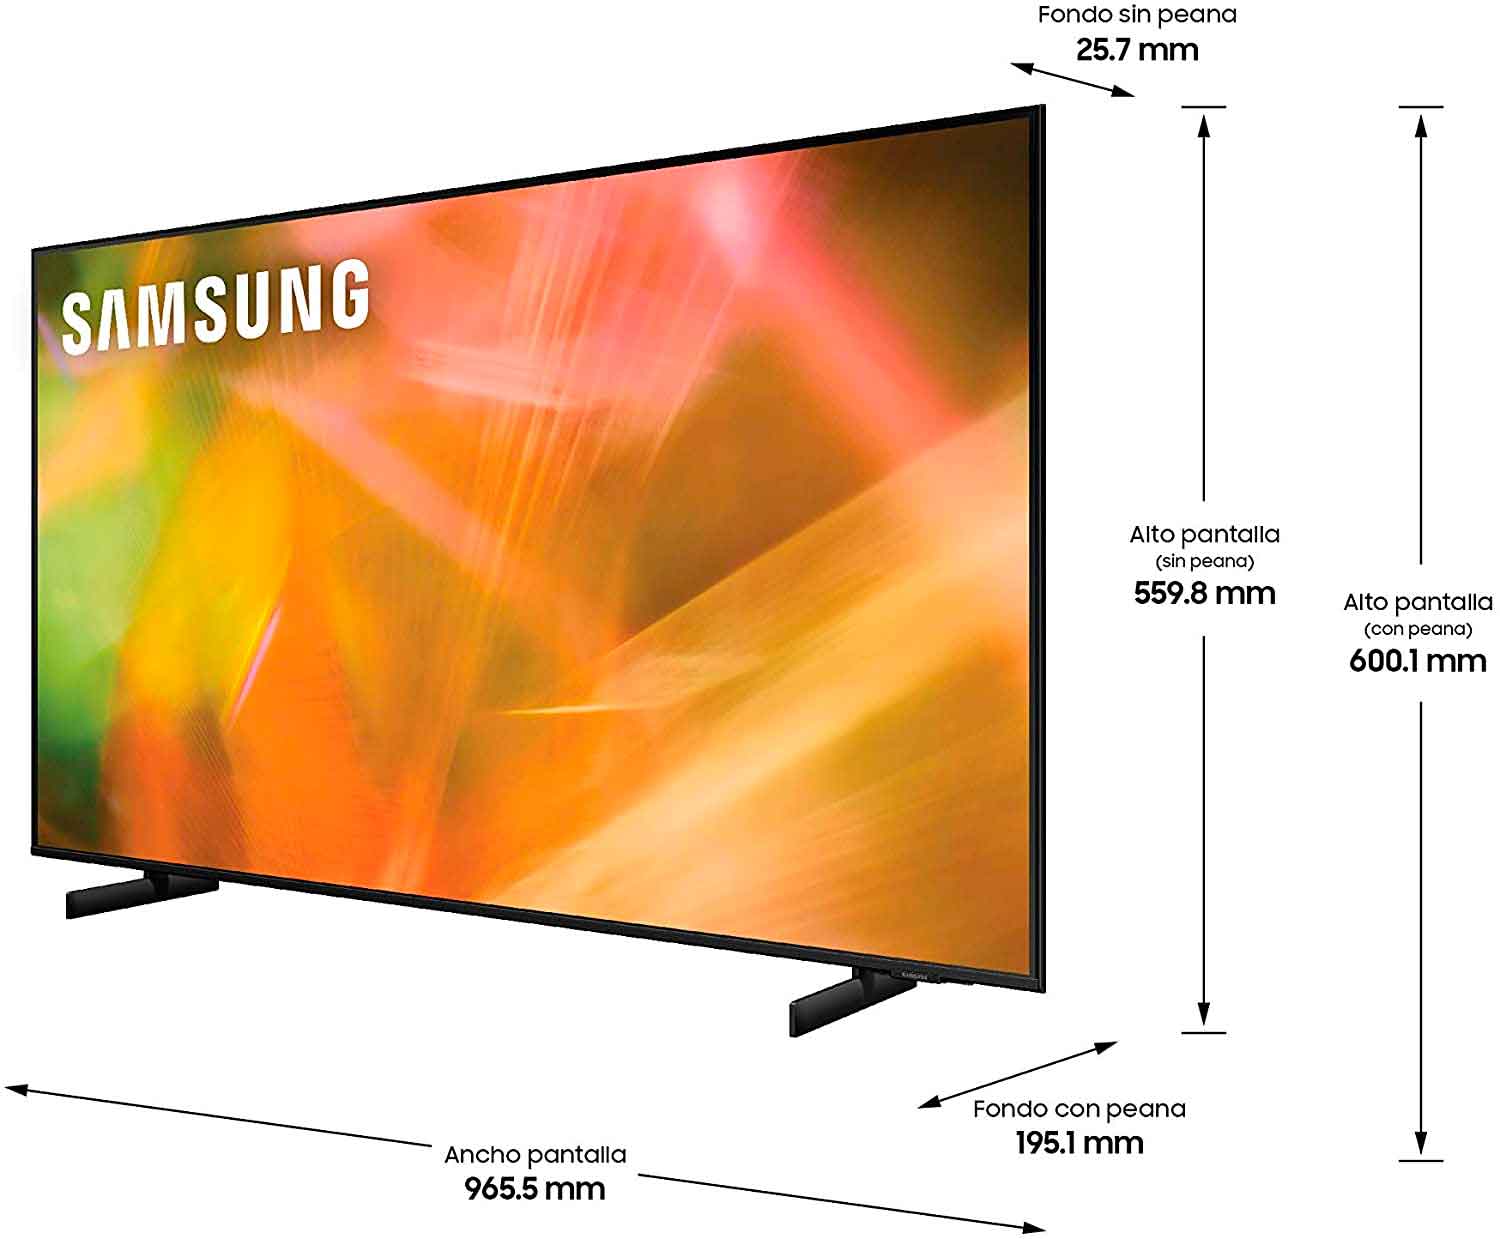 43-inch Samsung UHD 4K TV, on Black Friday only for 399 euros